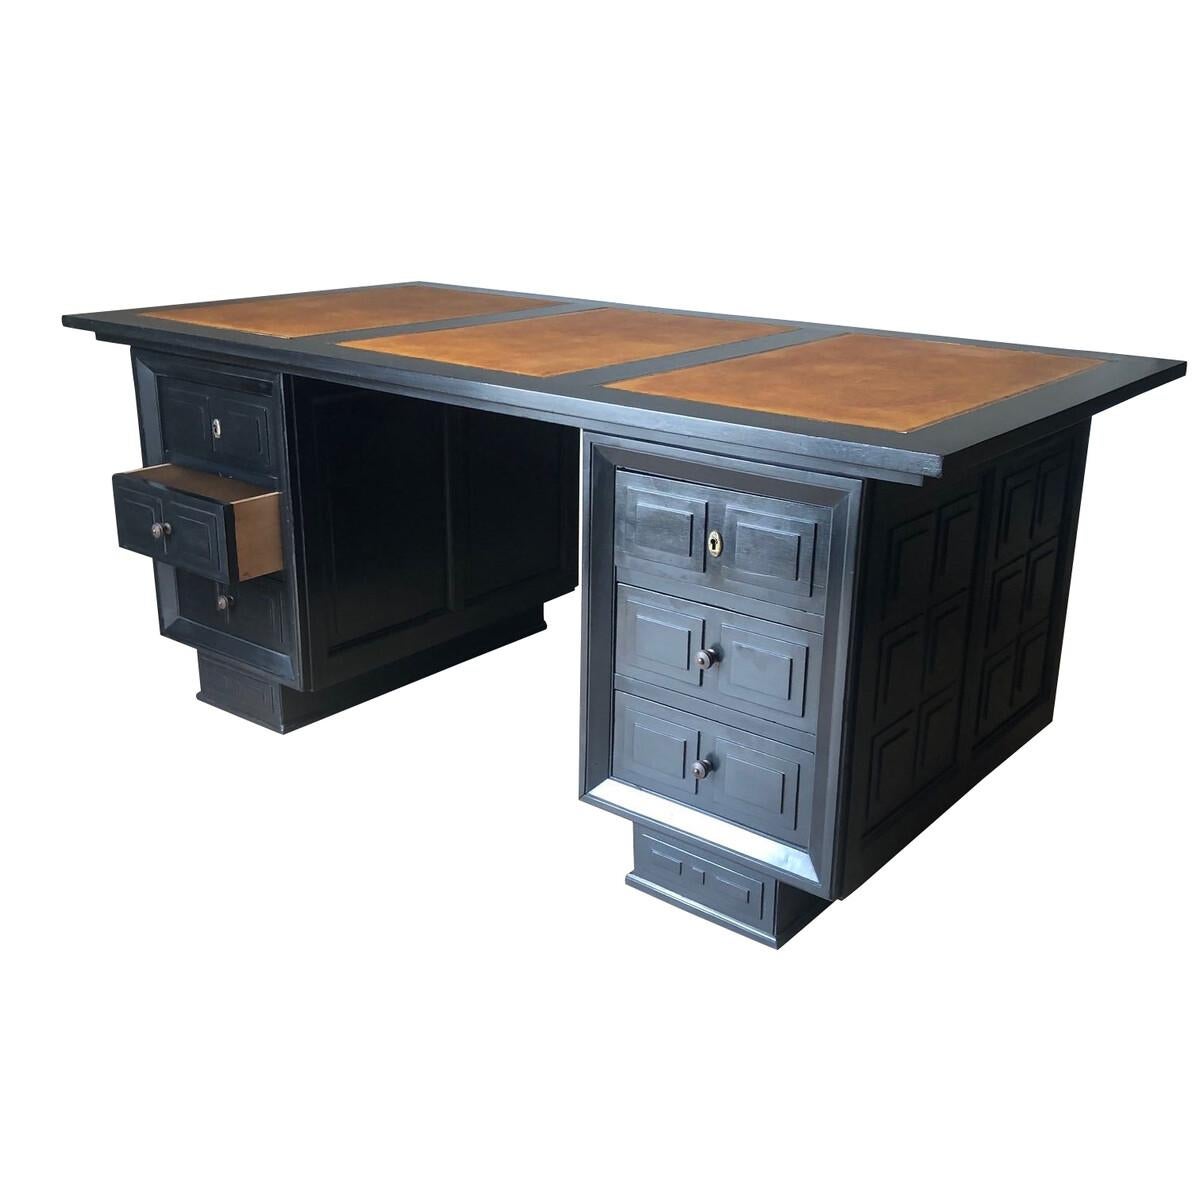 1940s French ebonized cubist design wood desk with leather top in the style of Maxime Old
Light brown leather top with Greek key border
Six drawers.
  